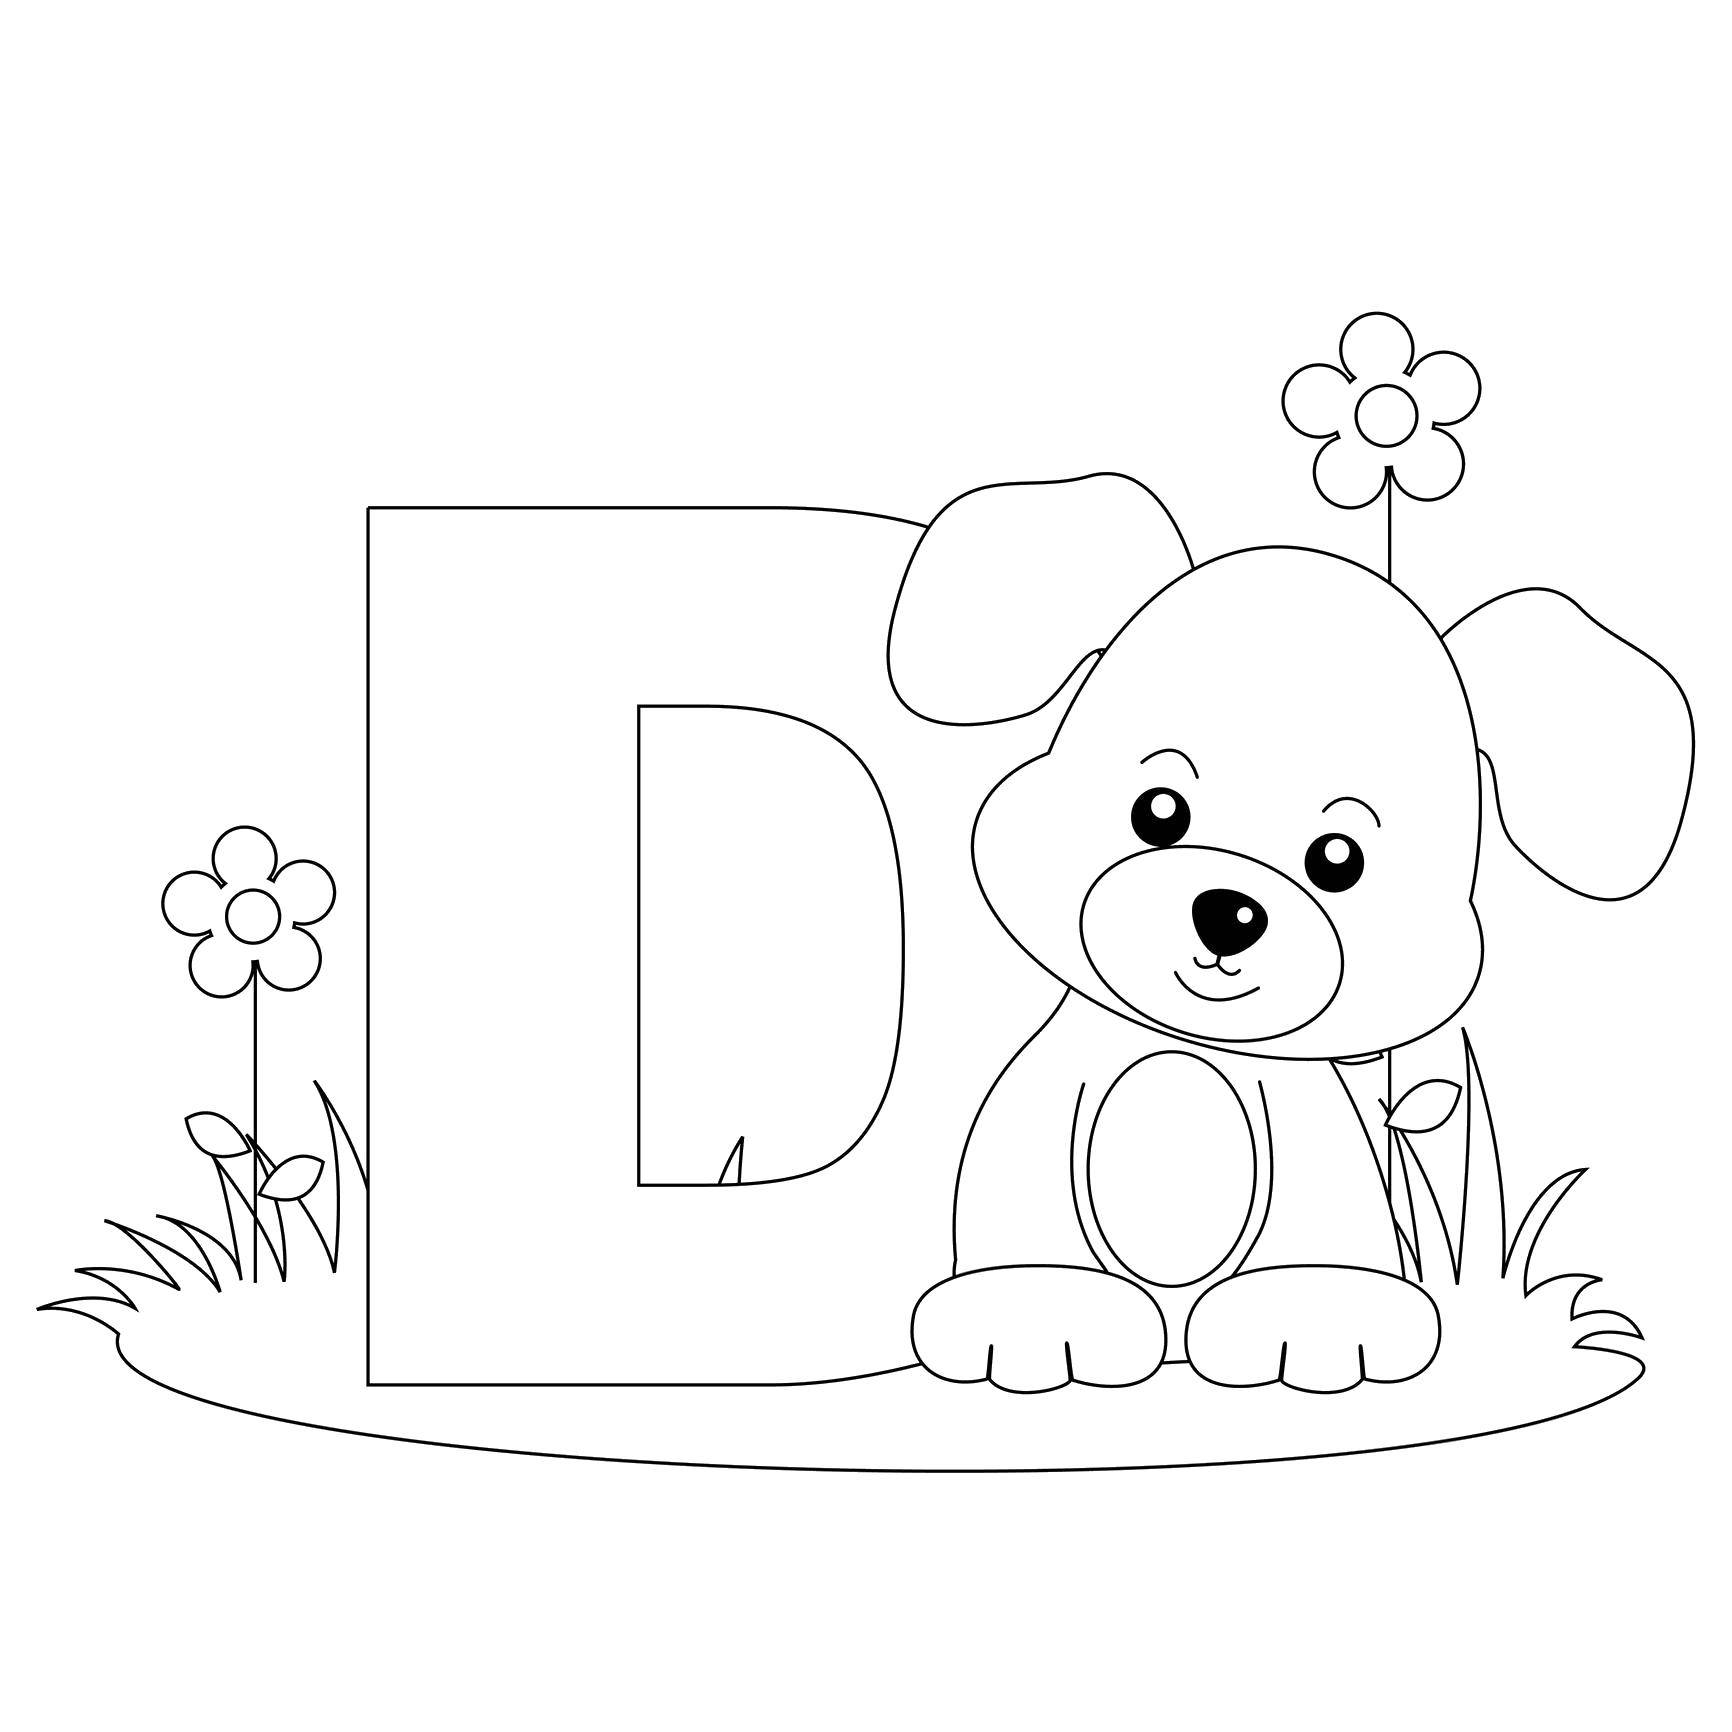 Coloring The dog is with. Category English alphabet. Tags:  The alphabet, letters, words.